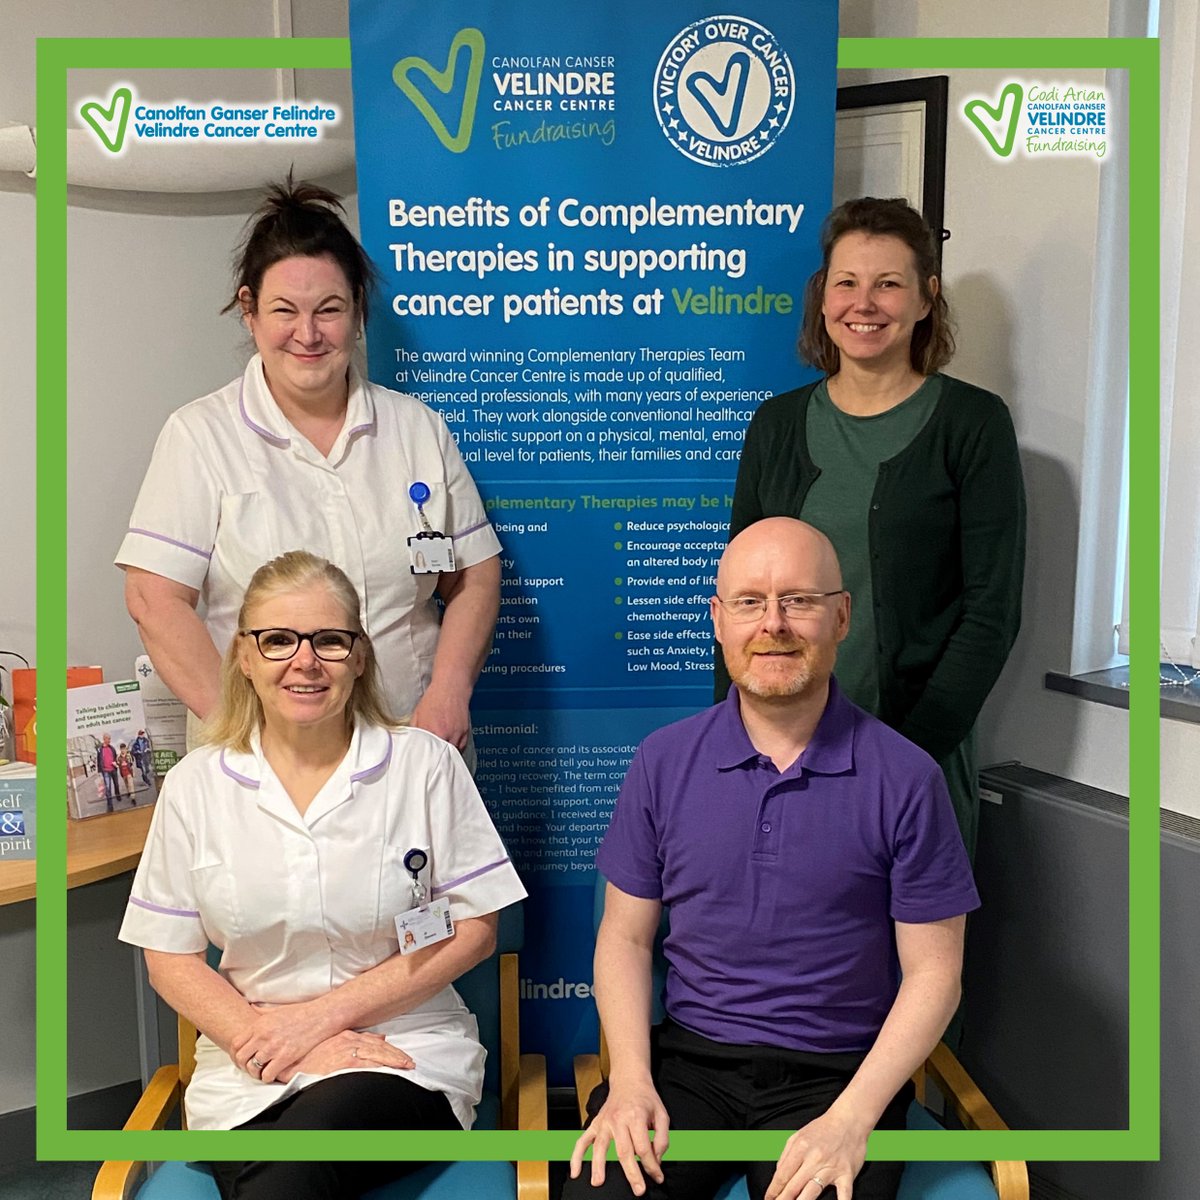 📢 We want your views! Our Complementary Therapies Service is here to support you during your time here and is fully funded by @Velindre. Please take a few moments to complete a short survey and let us know what you think of its offering. 🔗 secure.membra.co.uk/ExperienceVUNH…